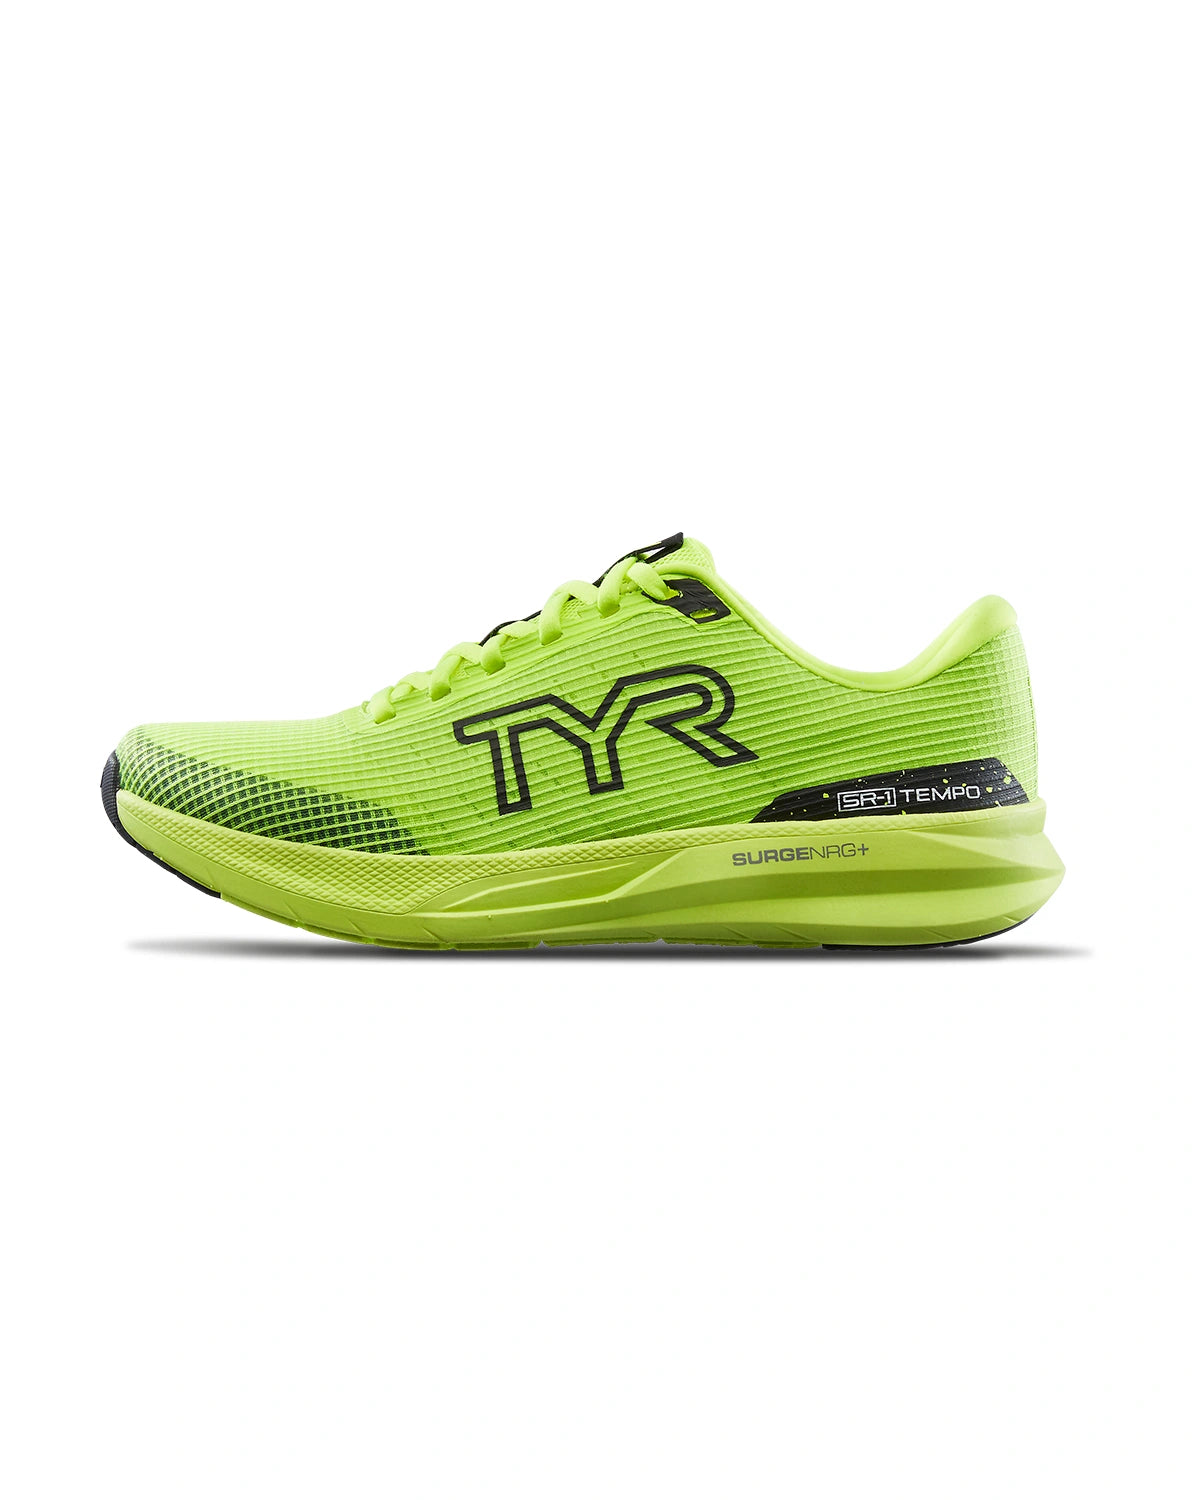 TYR SR-1 Tempo Runner Limited Edition Attak Yellow